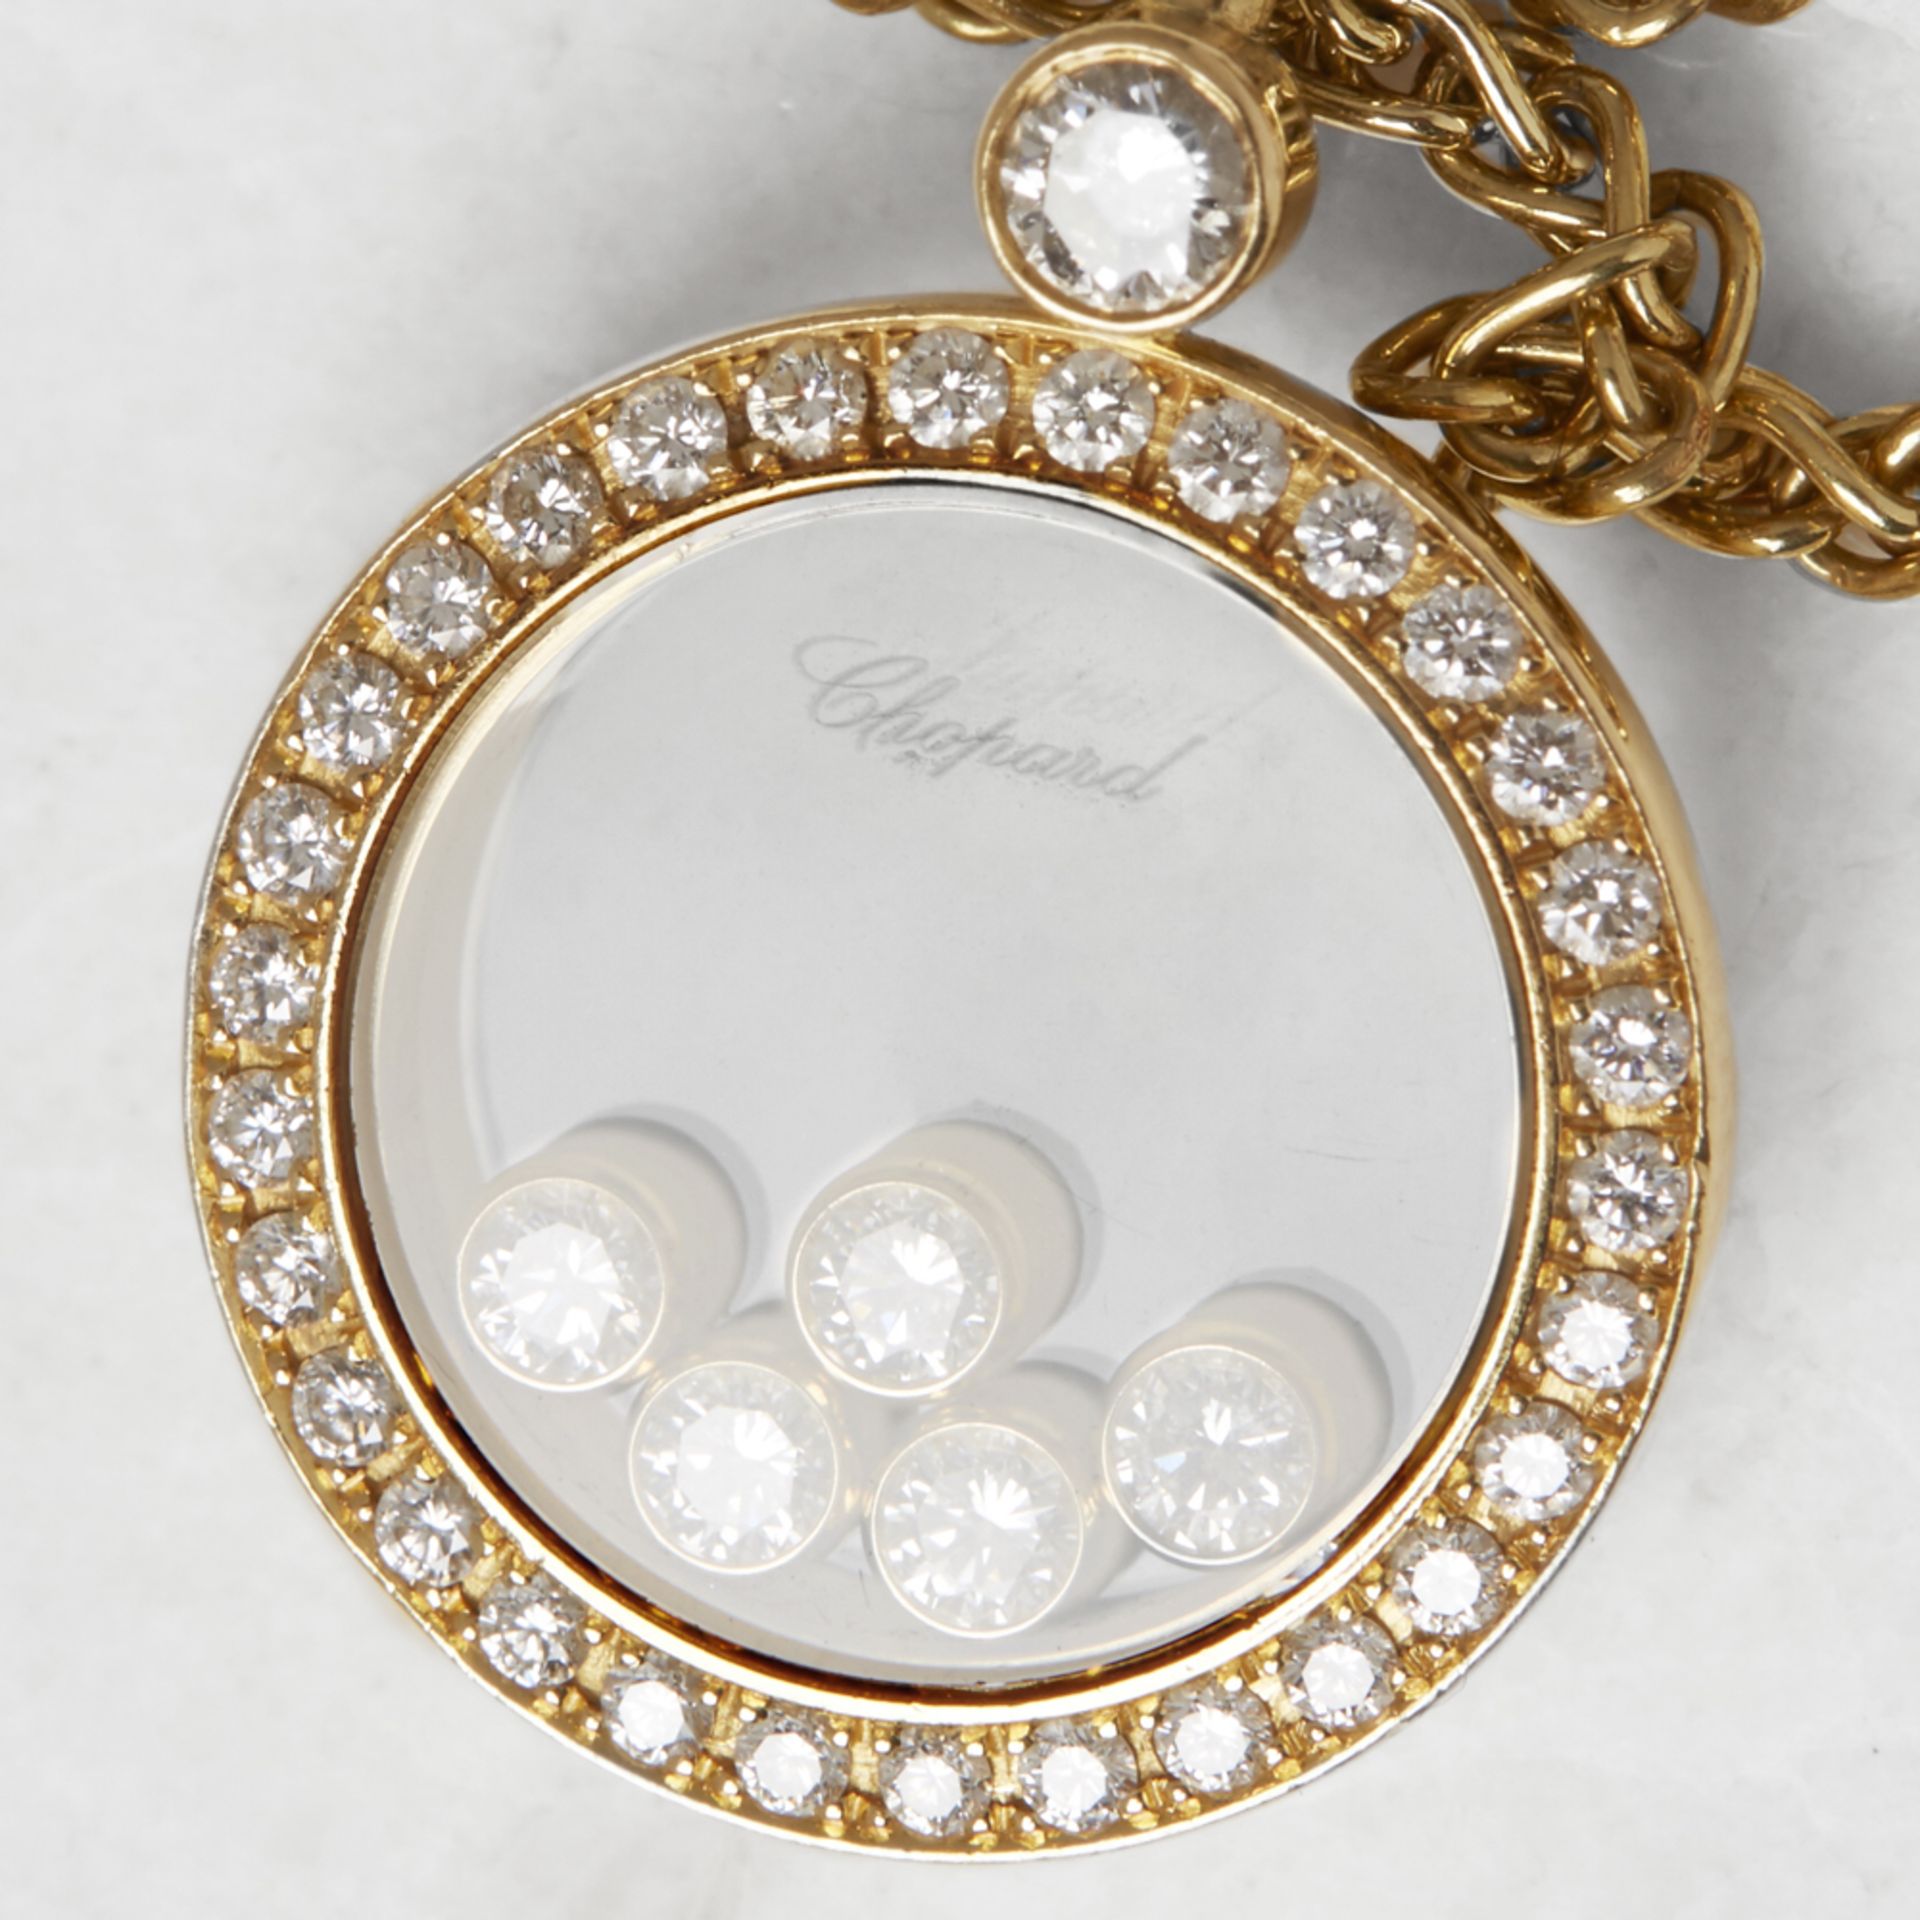 Chopard 18k Yellow Gold Happy Diamonds Necklace - Image 3 of 9